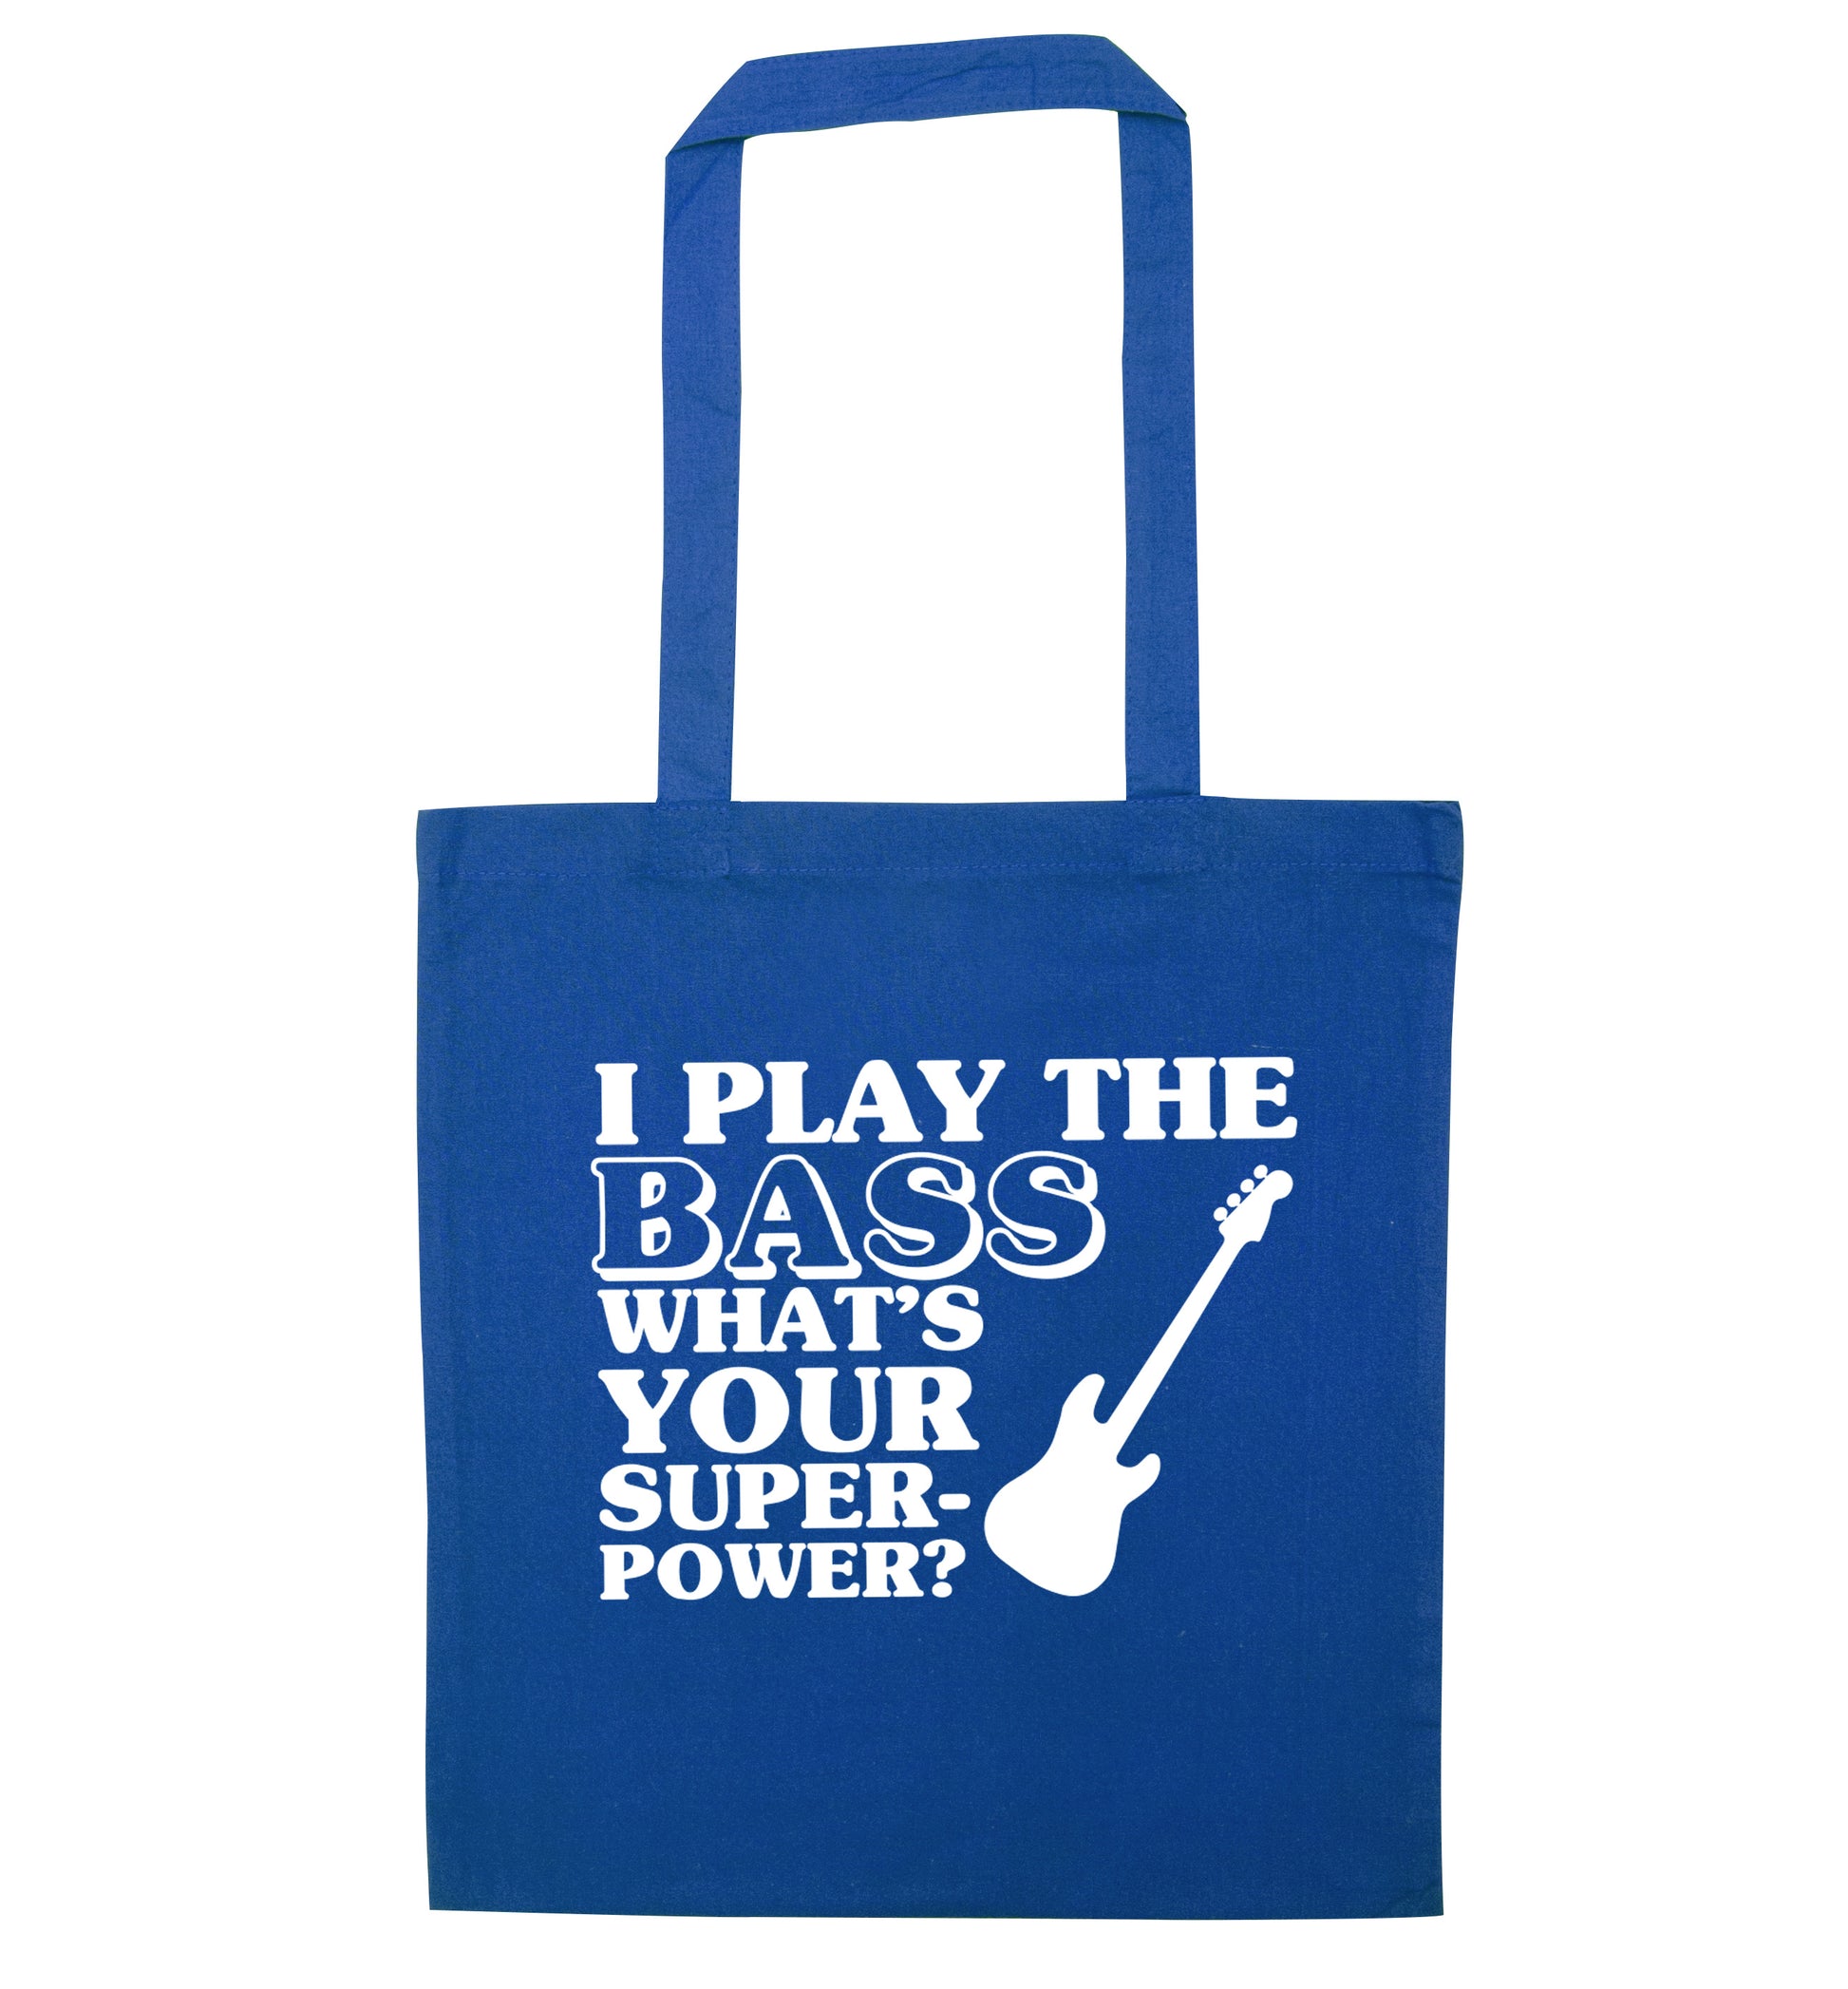 I play the bass what's your superpower? blue tote bag